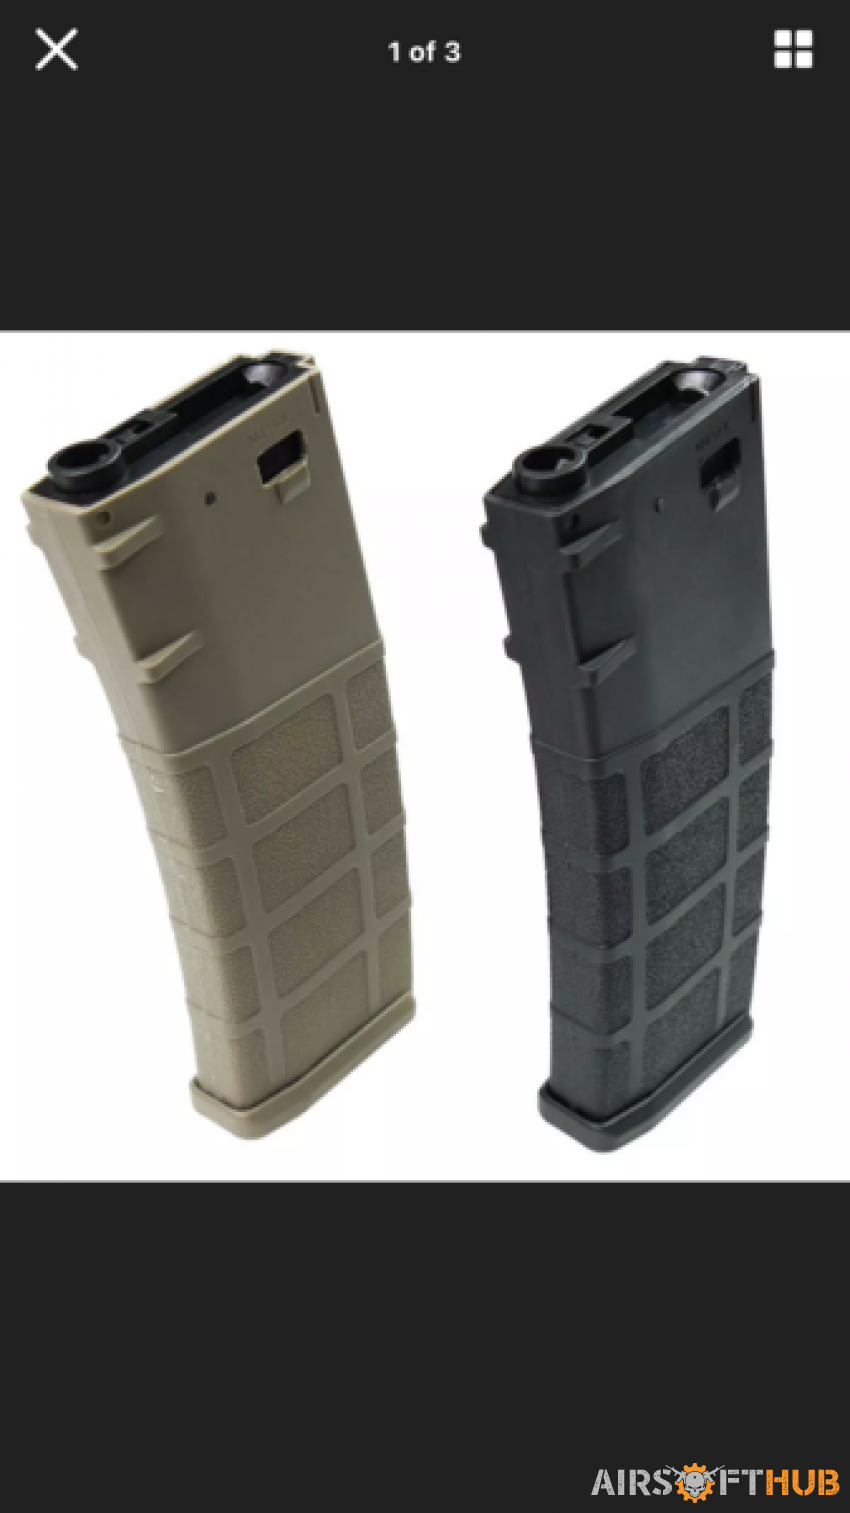 M4 & AK47 Spare Mags Wanted - Used airsoft equipment